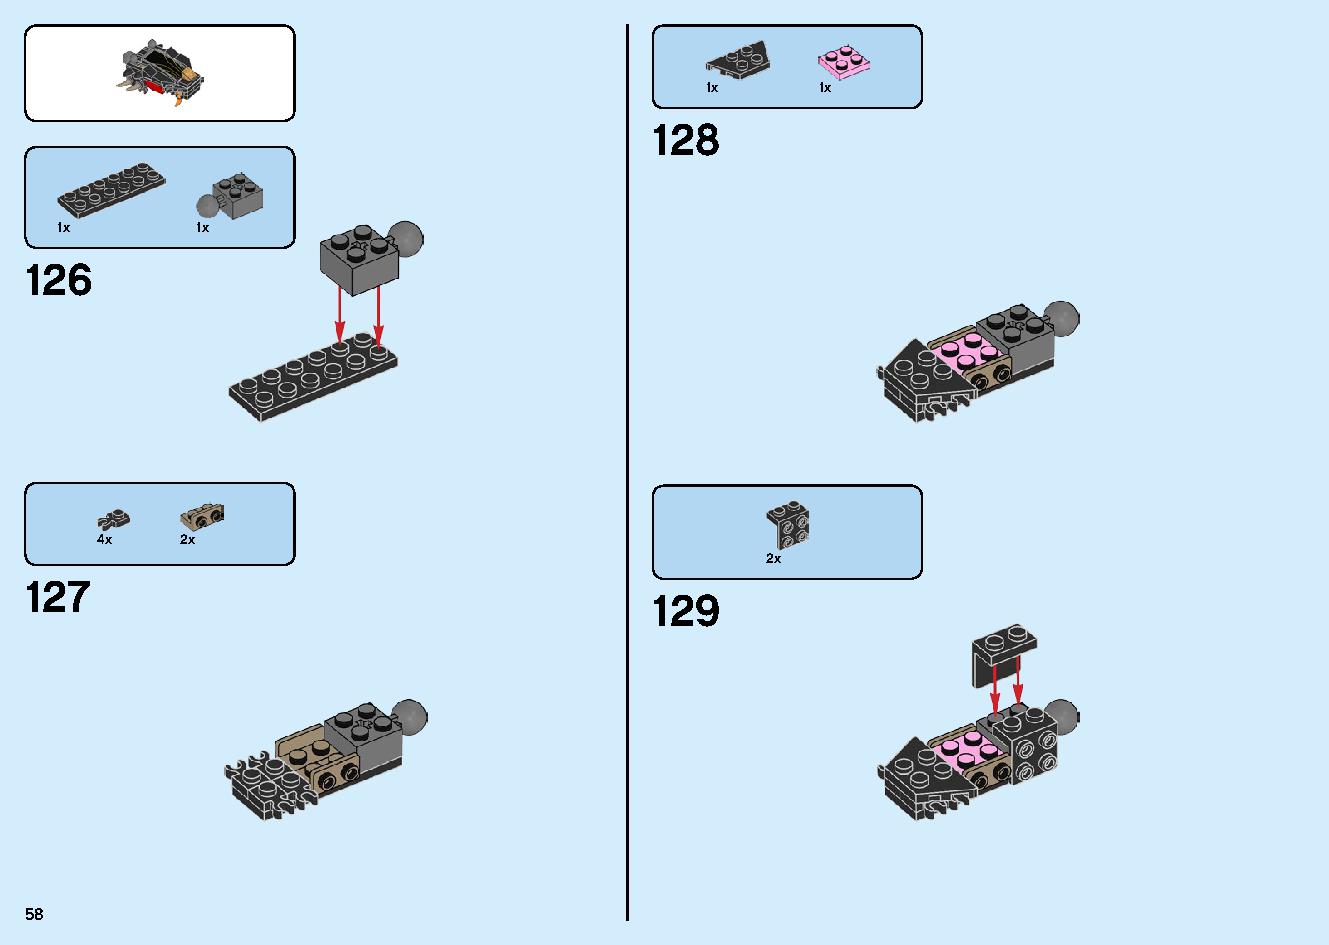 Fire Fang 70674 LEGO information LEGO instructions 58 page